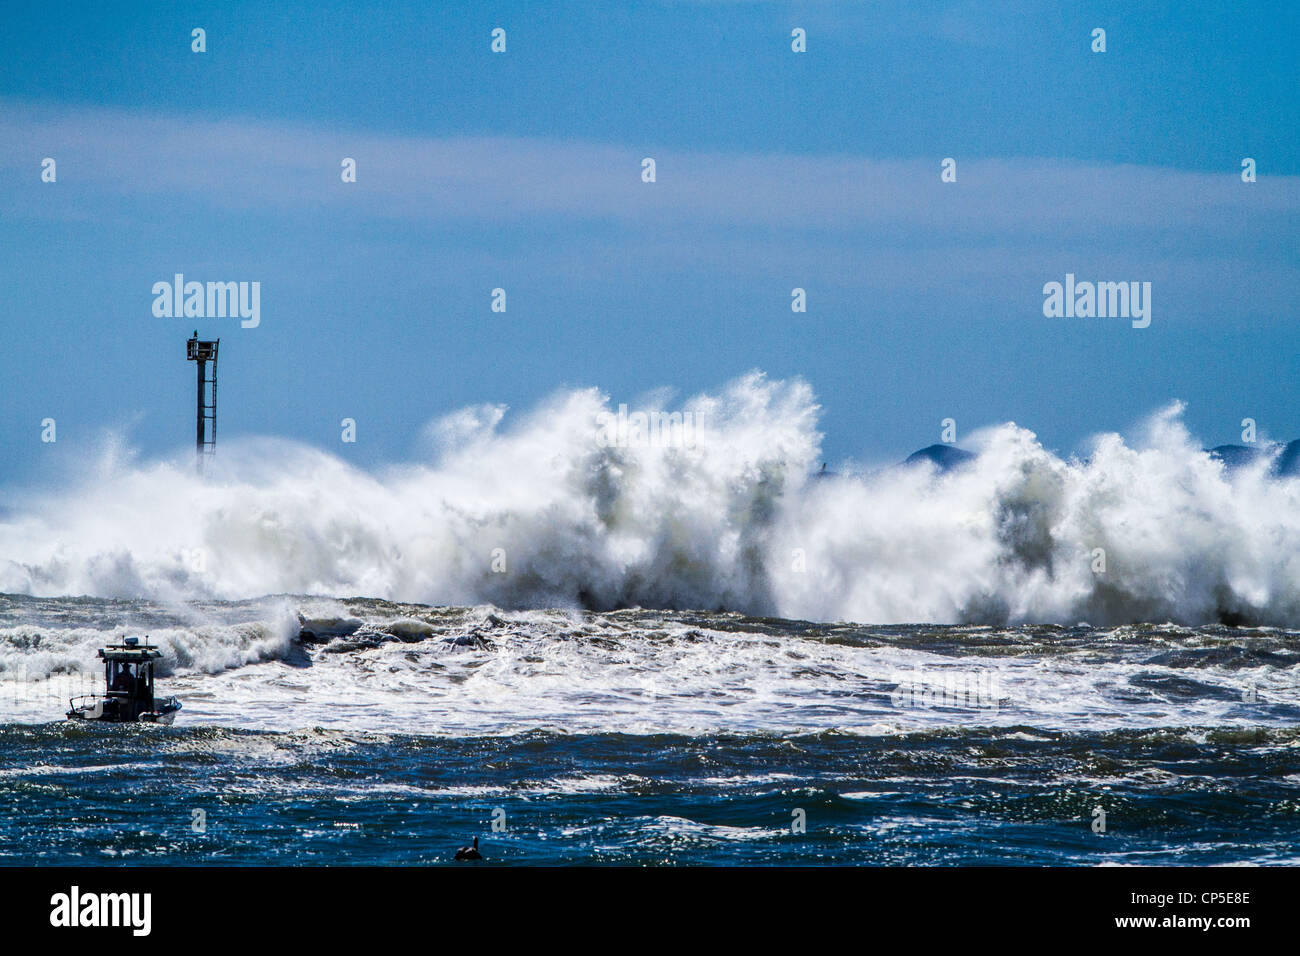 high-winds-and-big-waves-breaking-over-the-jetty-and-breakwater-in-CP5E8E.jpg